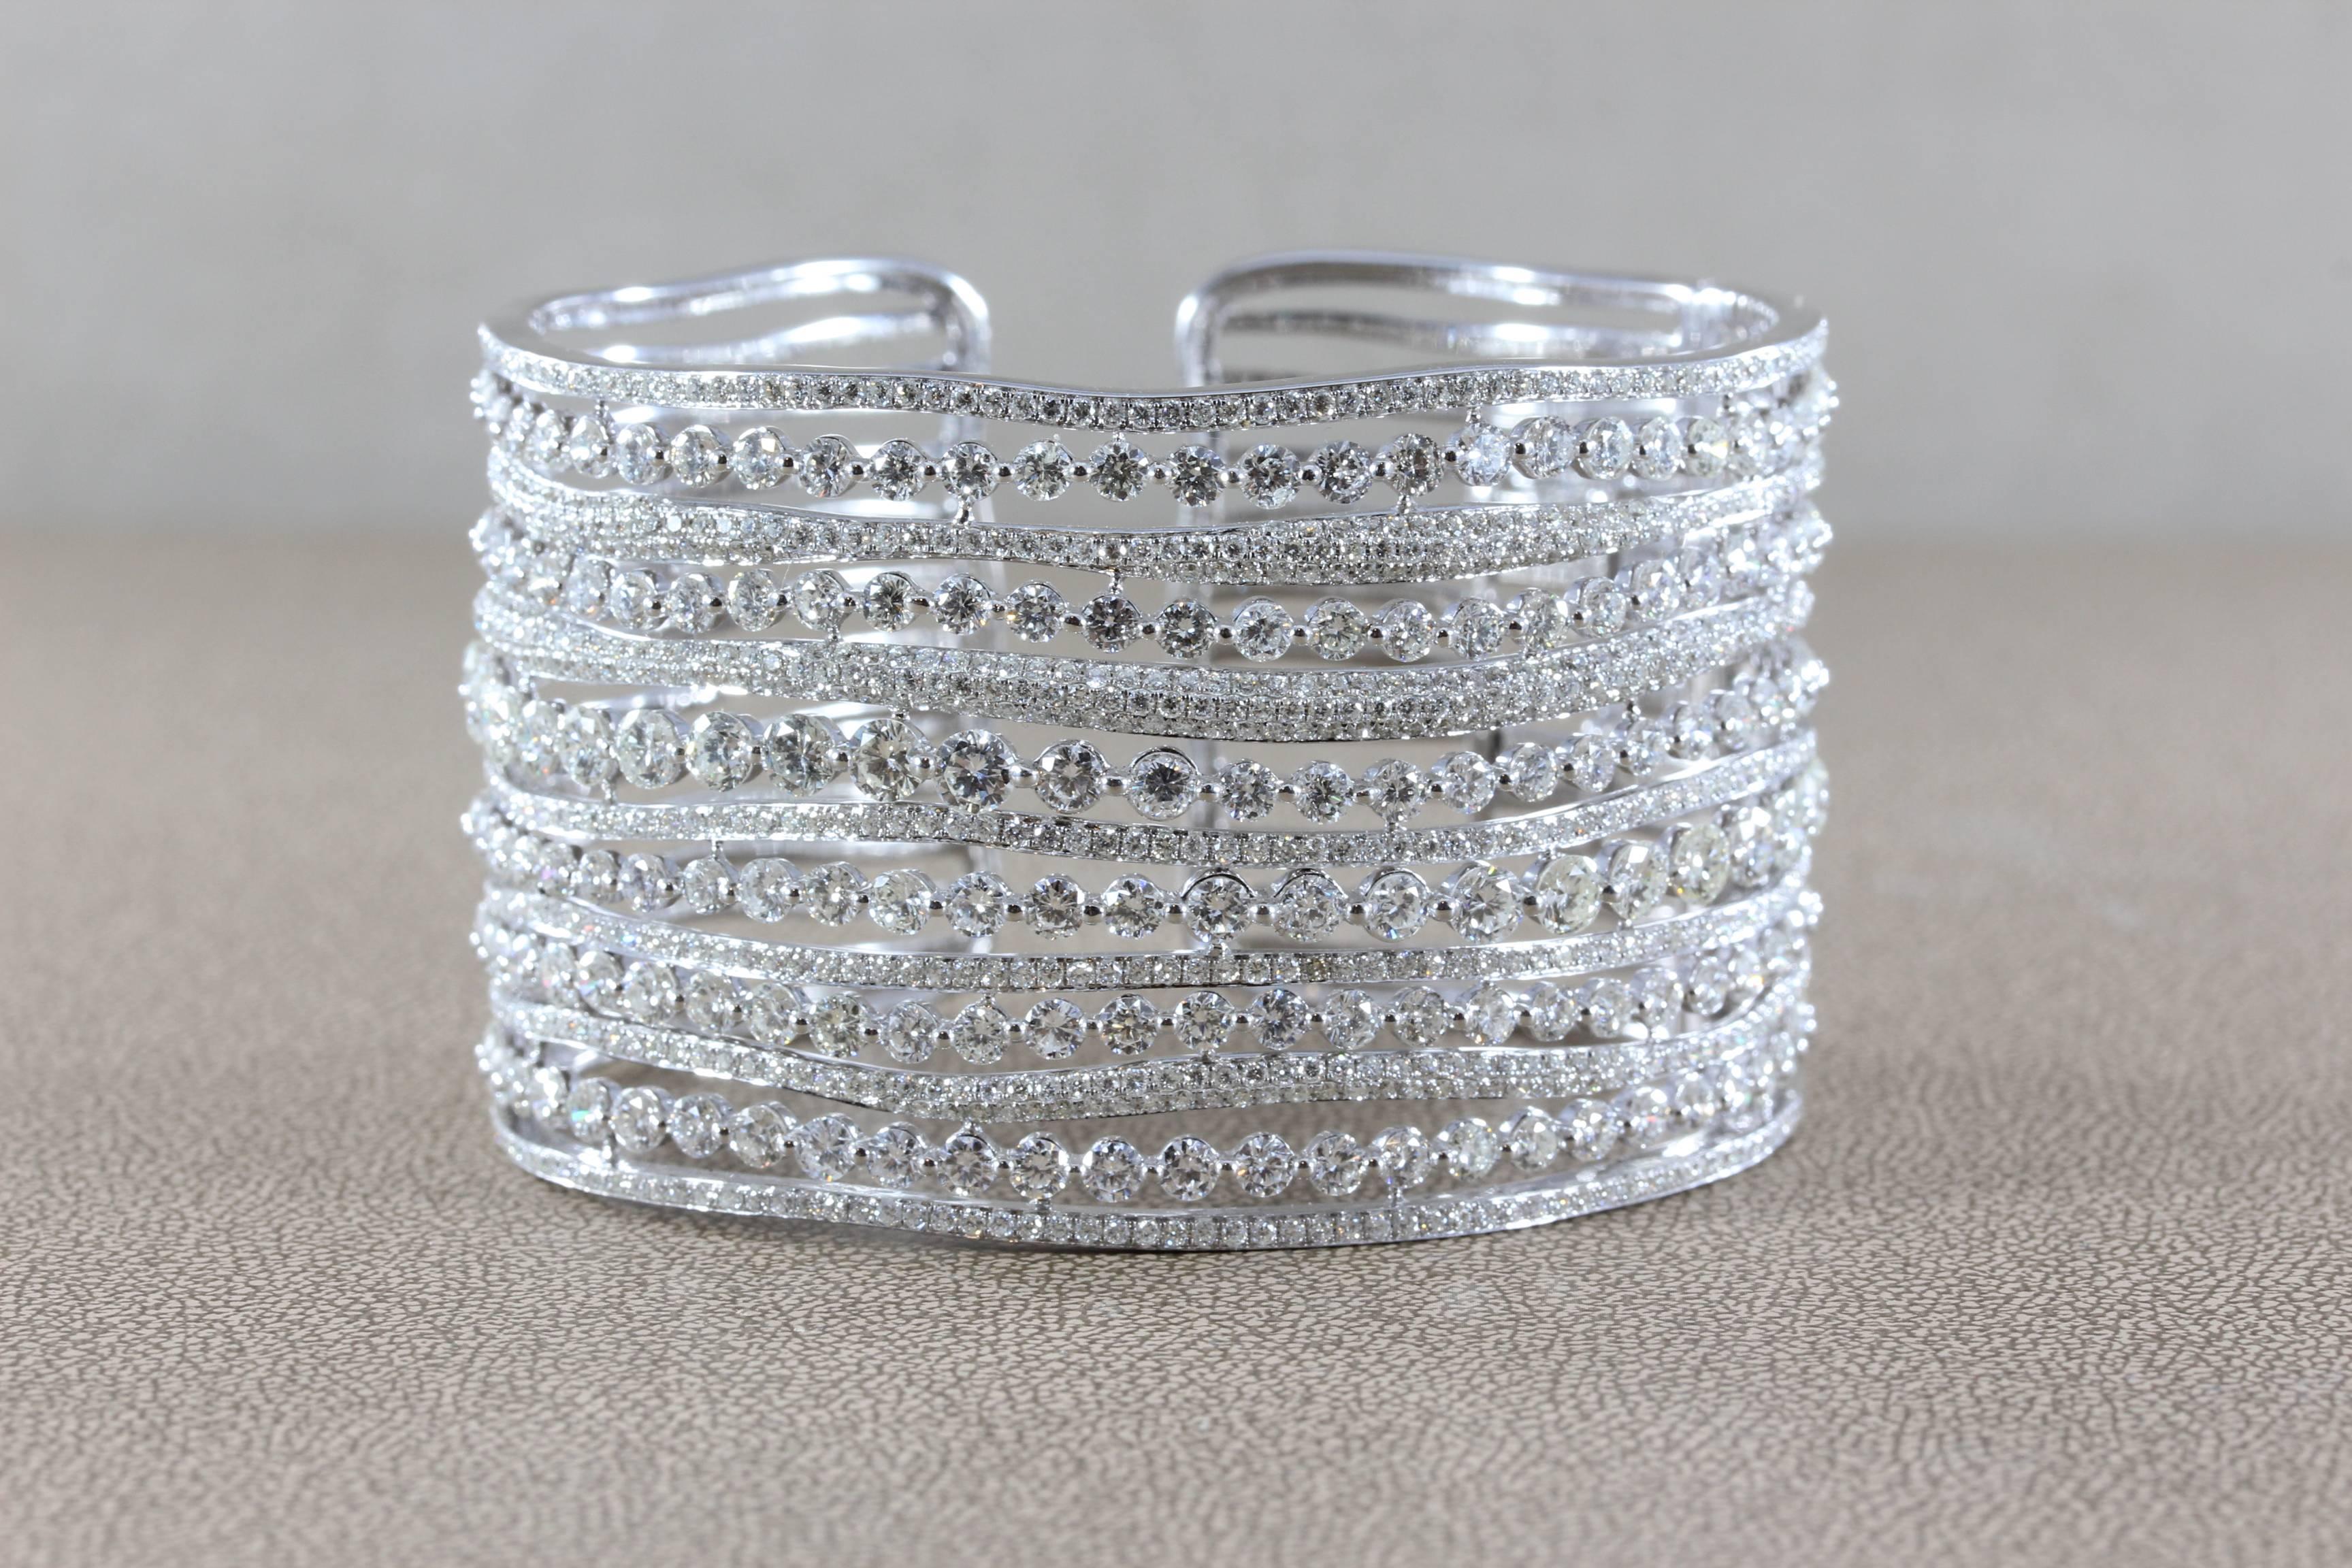 This luxurious cuff bracelet features just under 27 carats of round cut diamonds, both traditionally and pave set in 18K white gold. With over 10 rows of round cut diamonds totaling close to 27 carats, this bracelet is superb. 